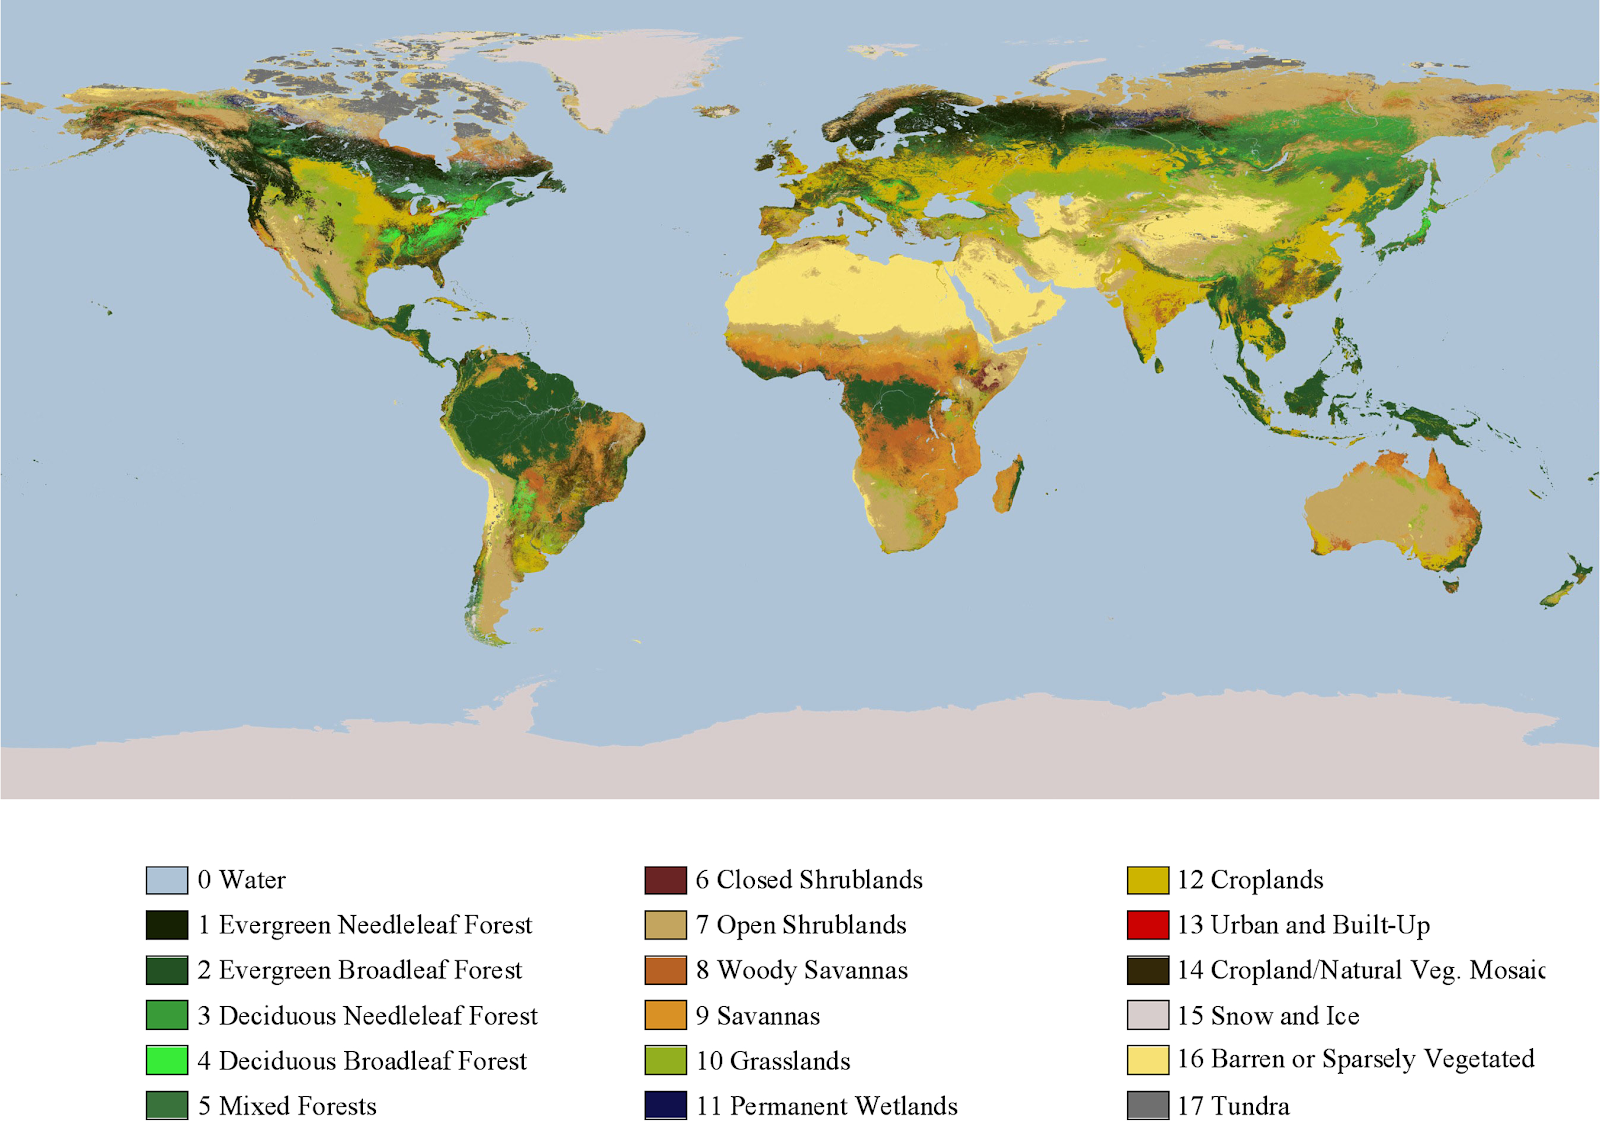 his image shows land cover through a color-coded classification. There are 17 types of land cover, ranging from evergreen needleleaf forest to tundra. Water is depicted in light blue. Credit: NASA GSFC 